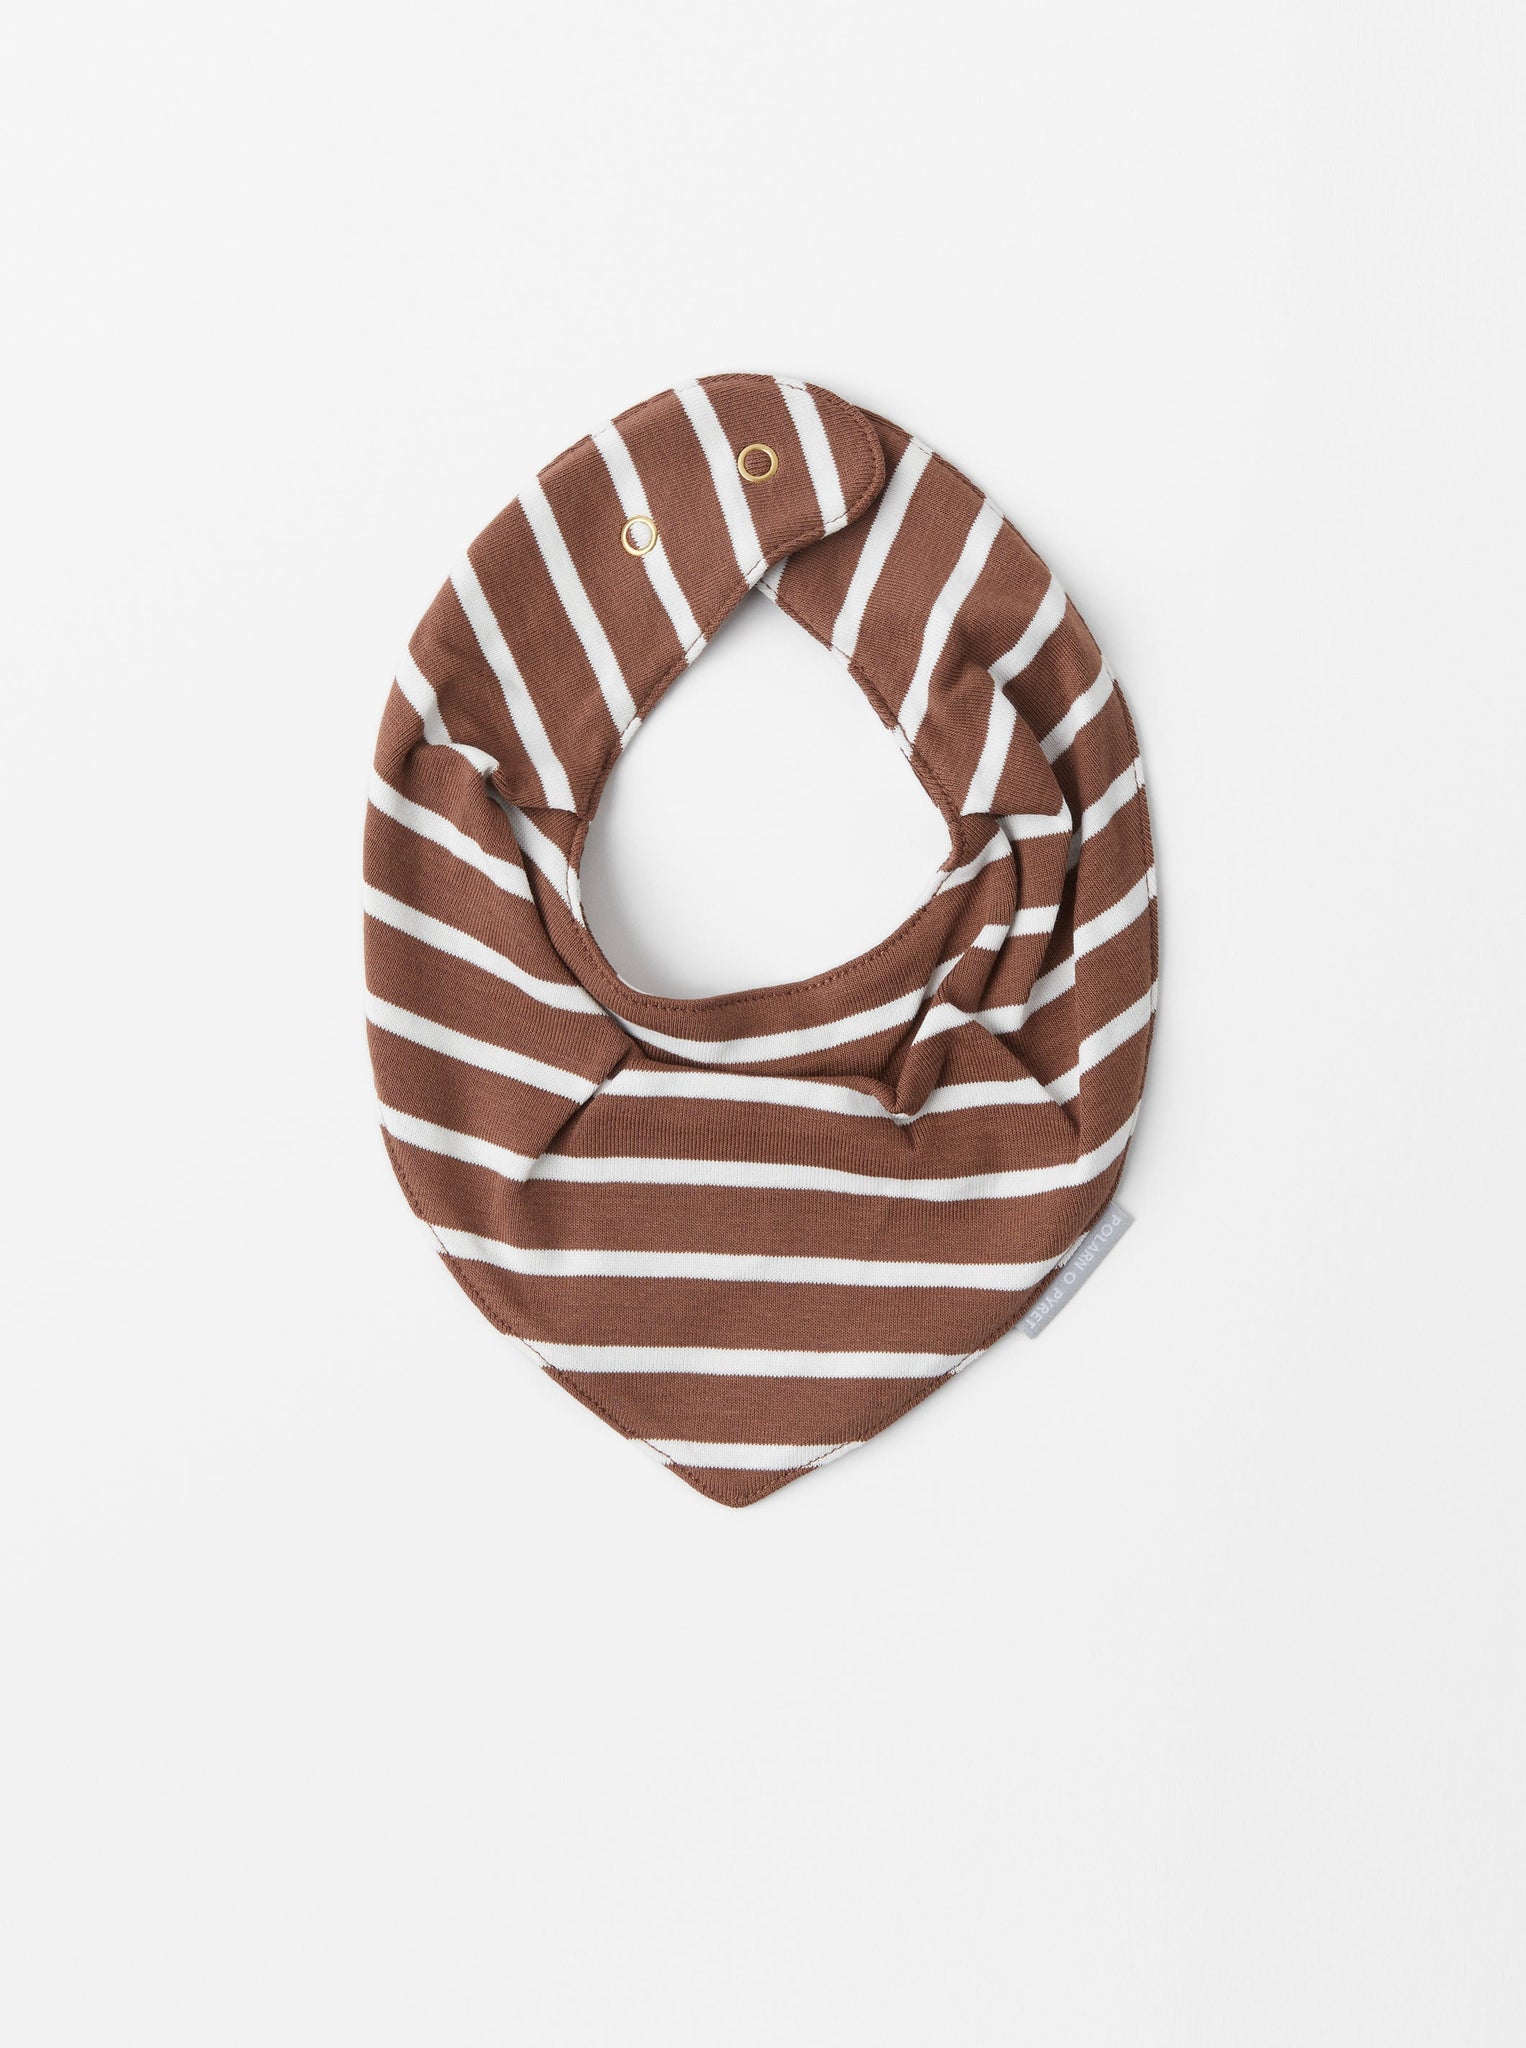 Organic Cotton Brown Baby Bib from the Polarn O. Pyret Kidswear collection. Clothes made using sustainably sourced materials.